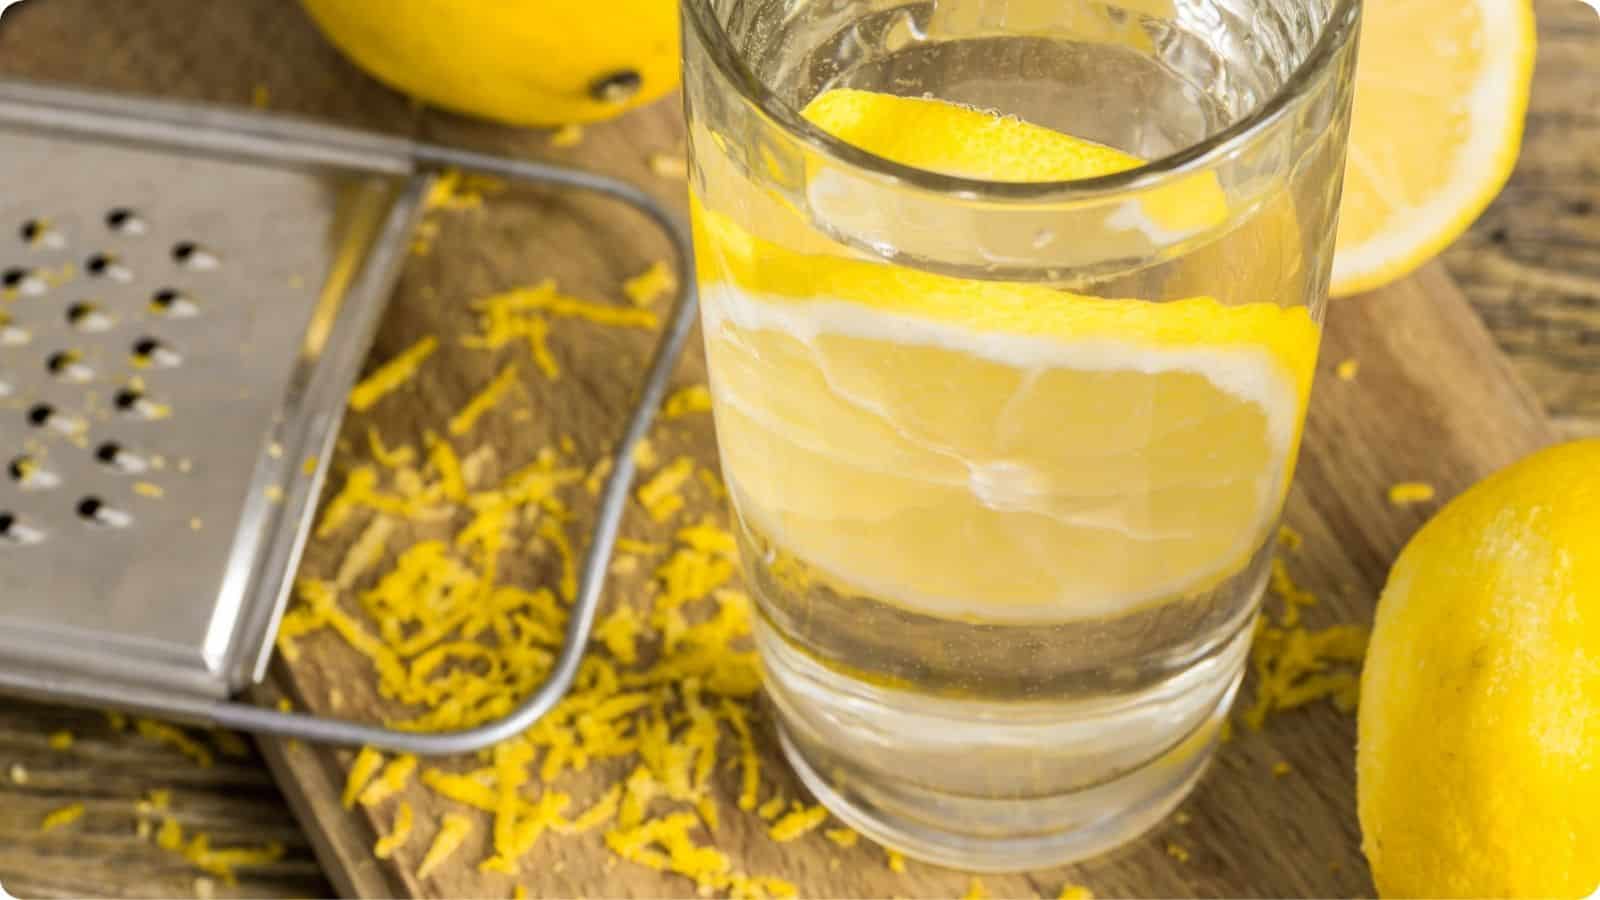 Lemon water with lemon zest on the cutting board place on the wooden table.